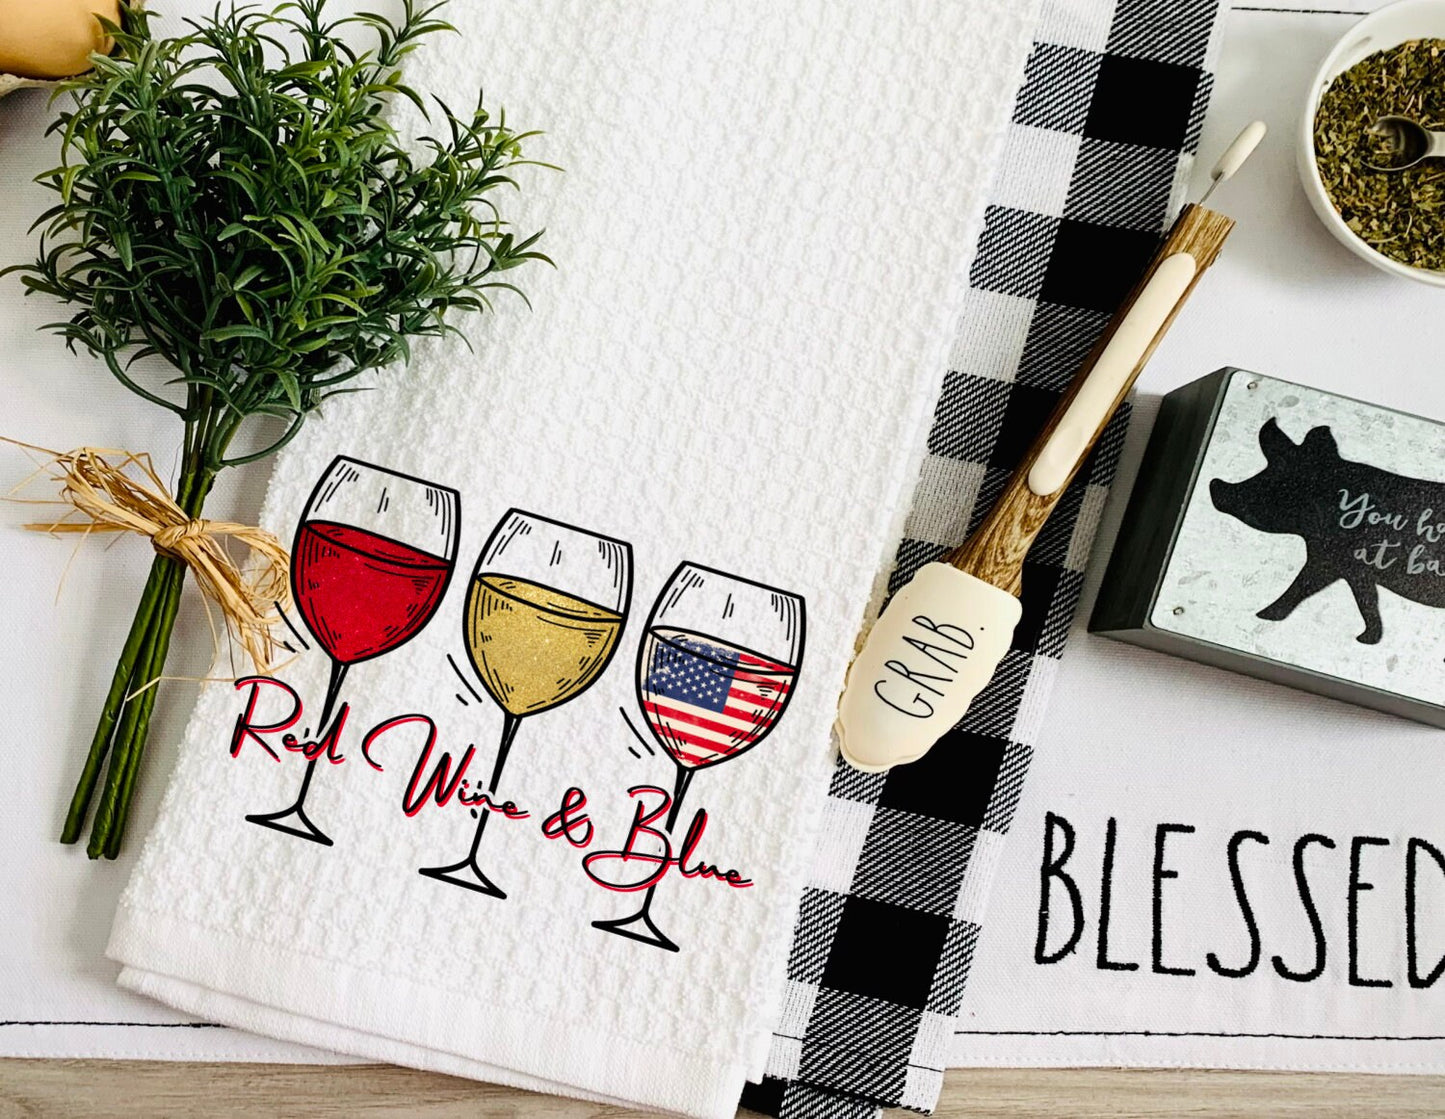 Red Wine And Blue Tea Dish Towel - Funny Independence Day 4th Of July Towel Kitchen Décor - Housewarming Decorations house Towel